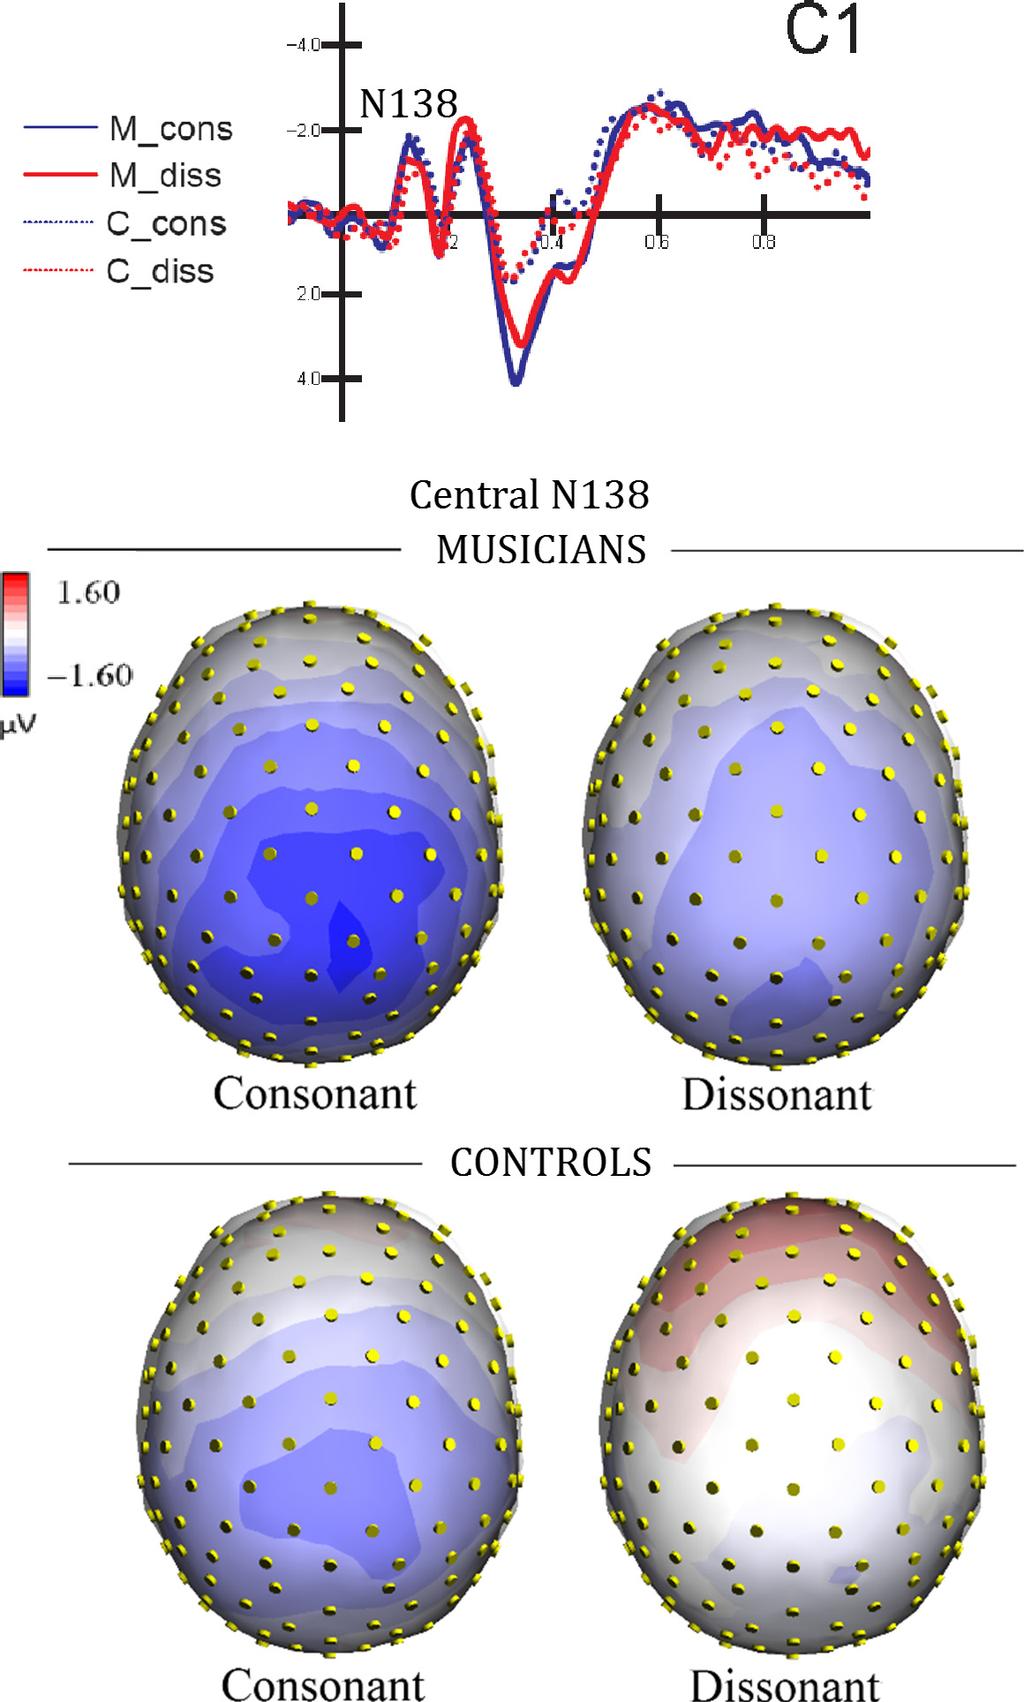 Left hemispheric asymmetry in musicians 9 musicians (1.87 lv, SE = 0.41) than in controls (0.69 lv, SE = 0.41). The factor Expertise showed a significant interaction with the factor frequency proximity (F1,22 = 4.